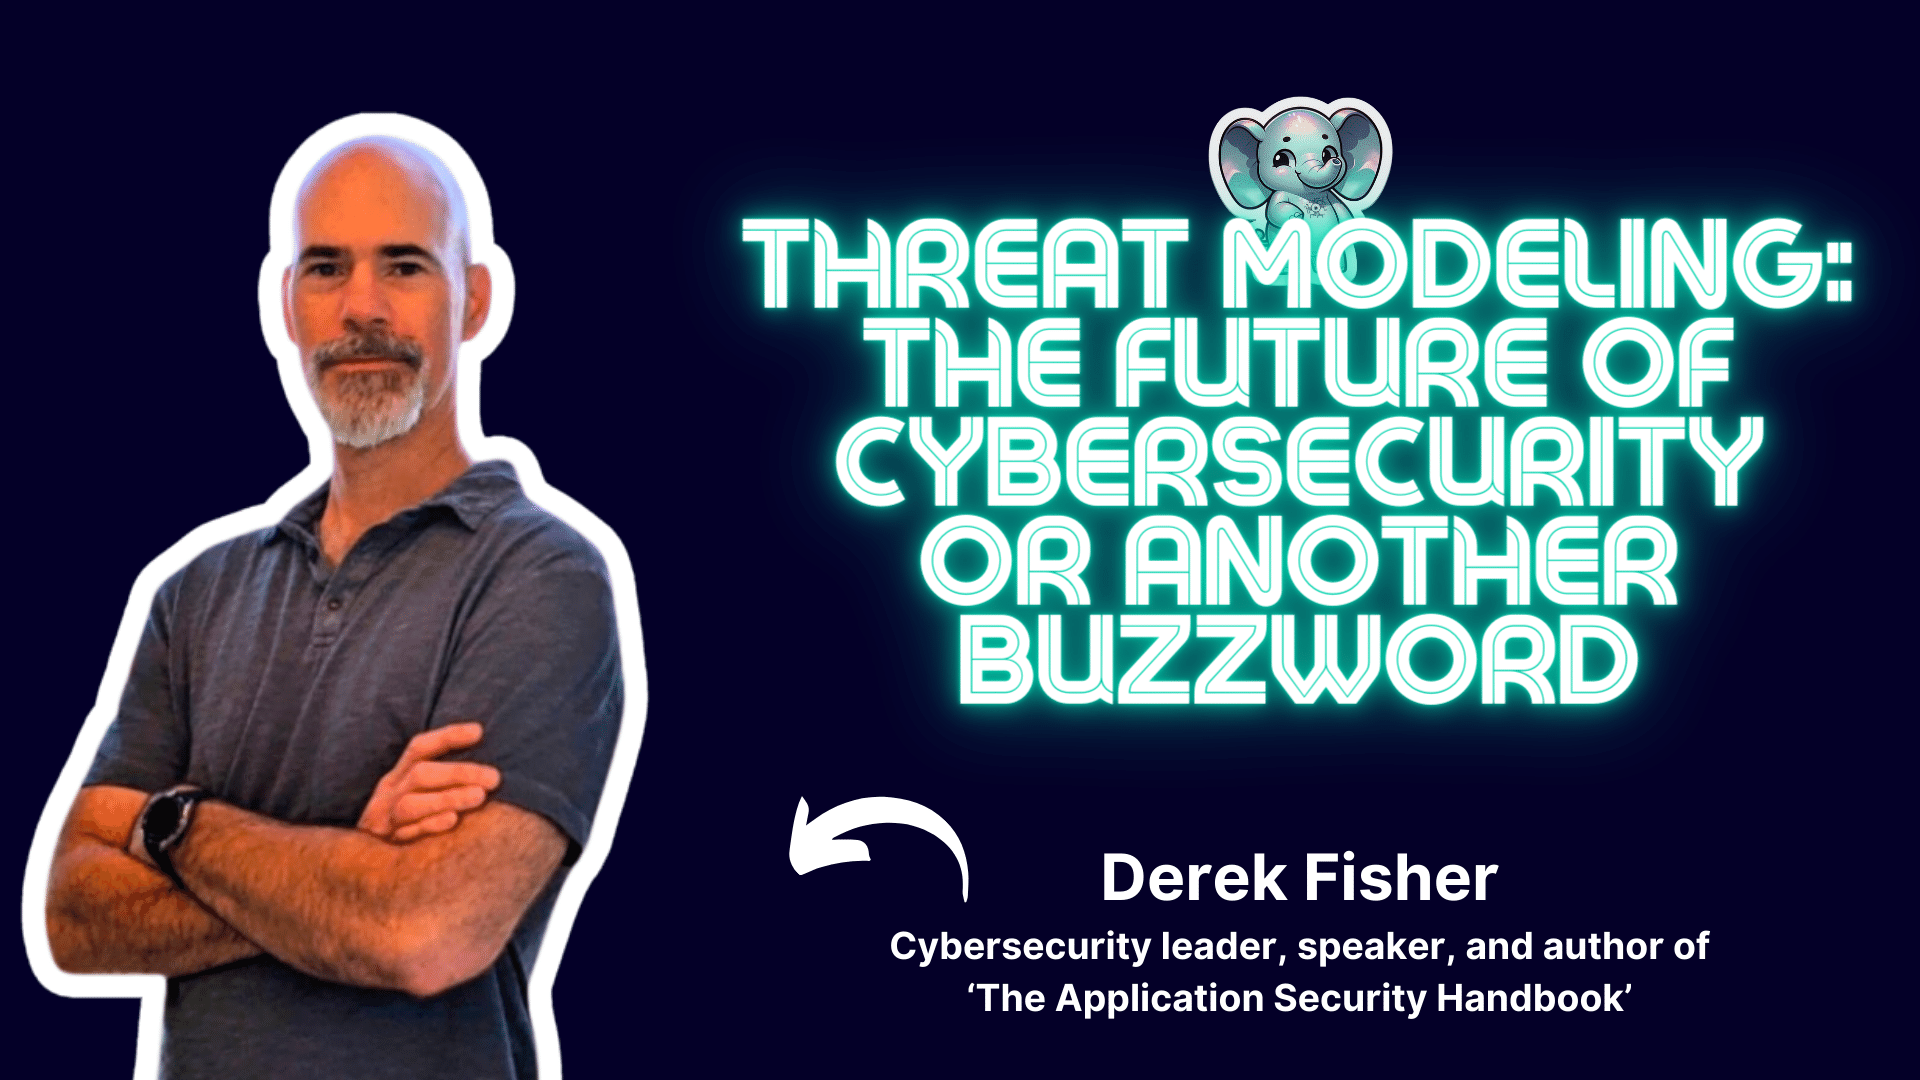 Threat modeling: the future of cybersecurity or another buzzword⎥Derek Fisher (author of The Application Security Handbook)